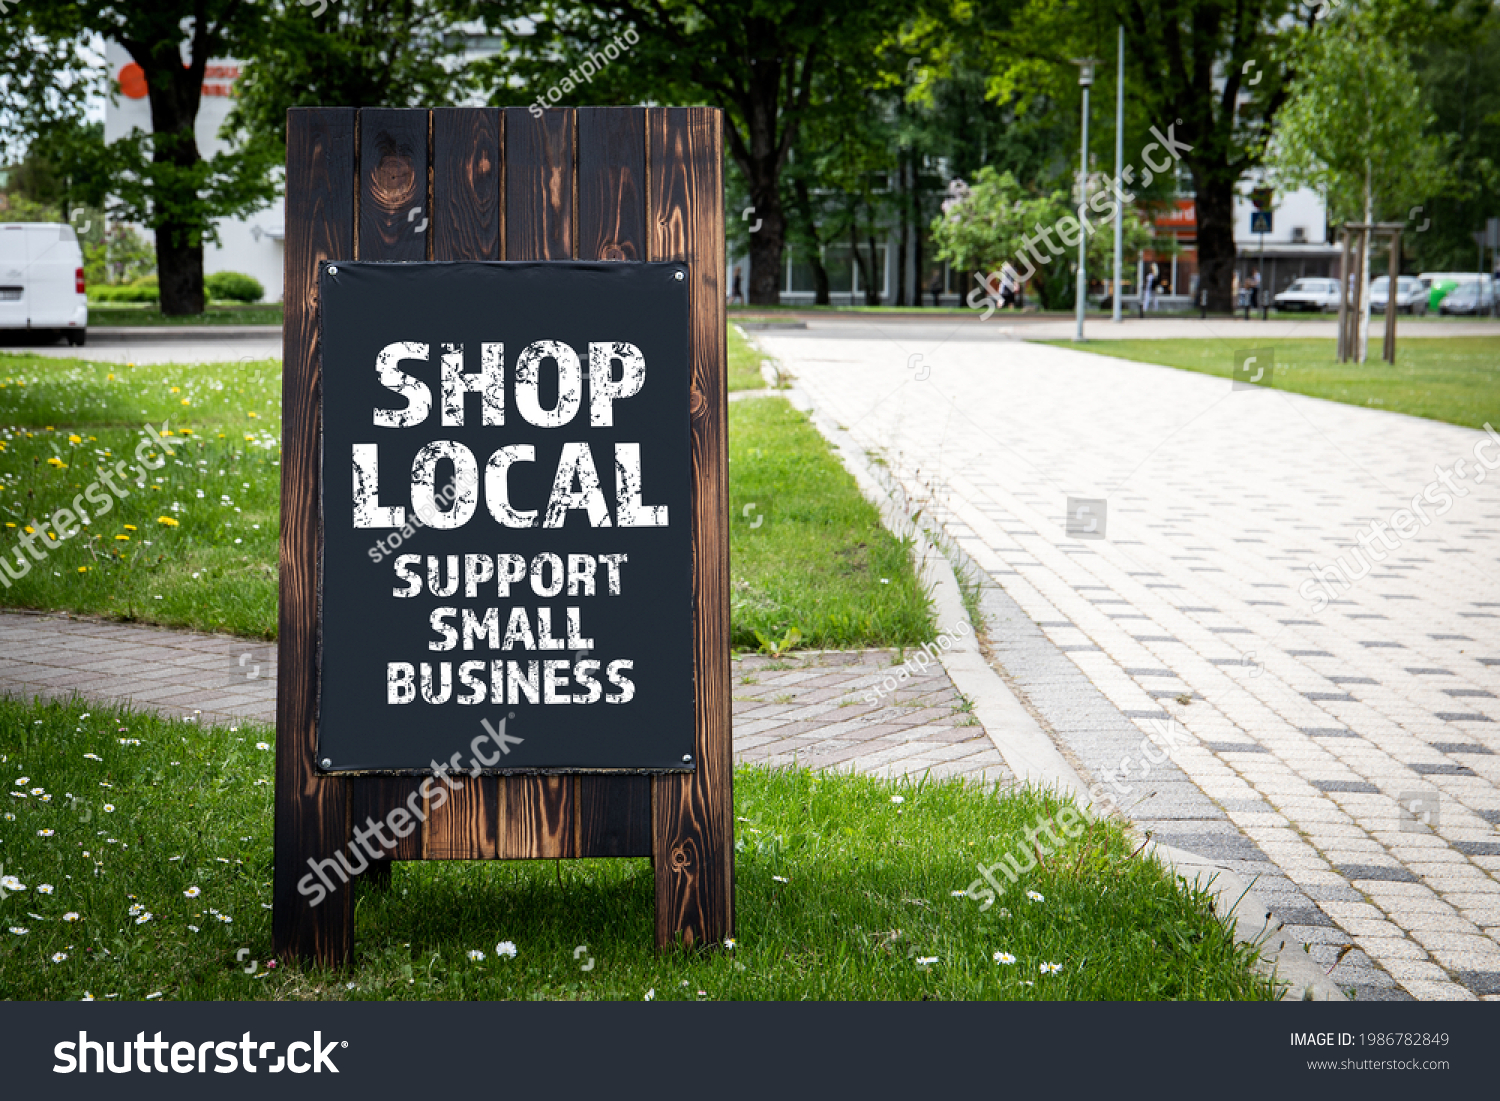 Shop Local. Support small business. Wooden billboard on the street, sunny day. #1986782849